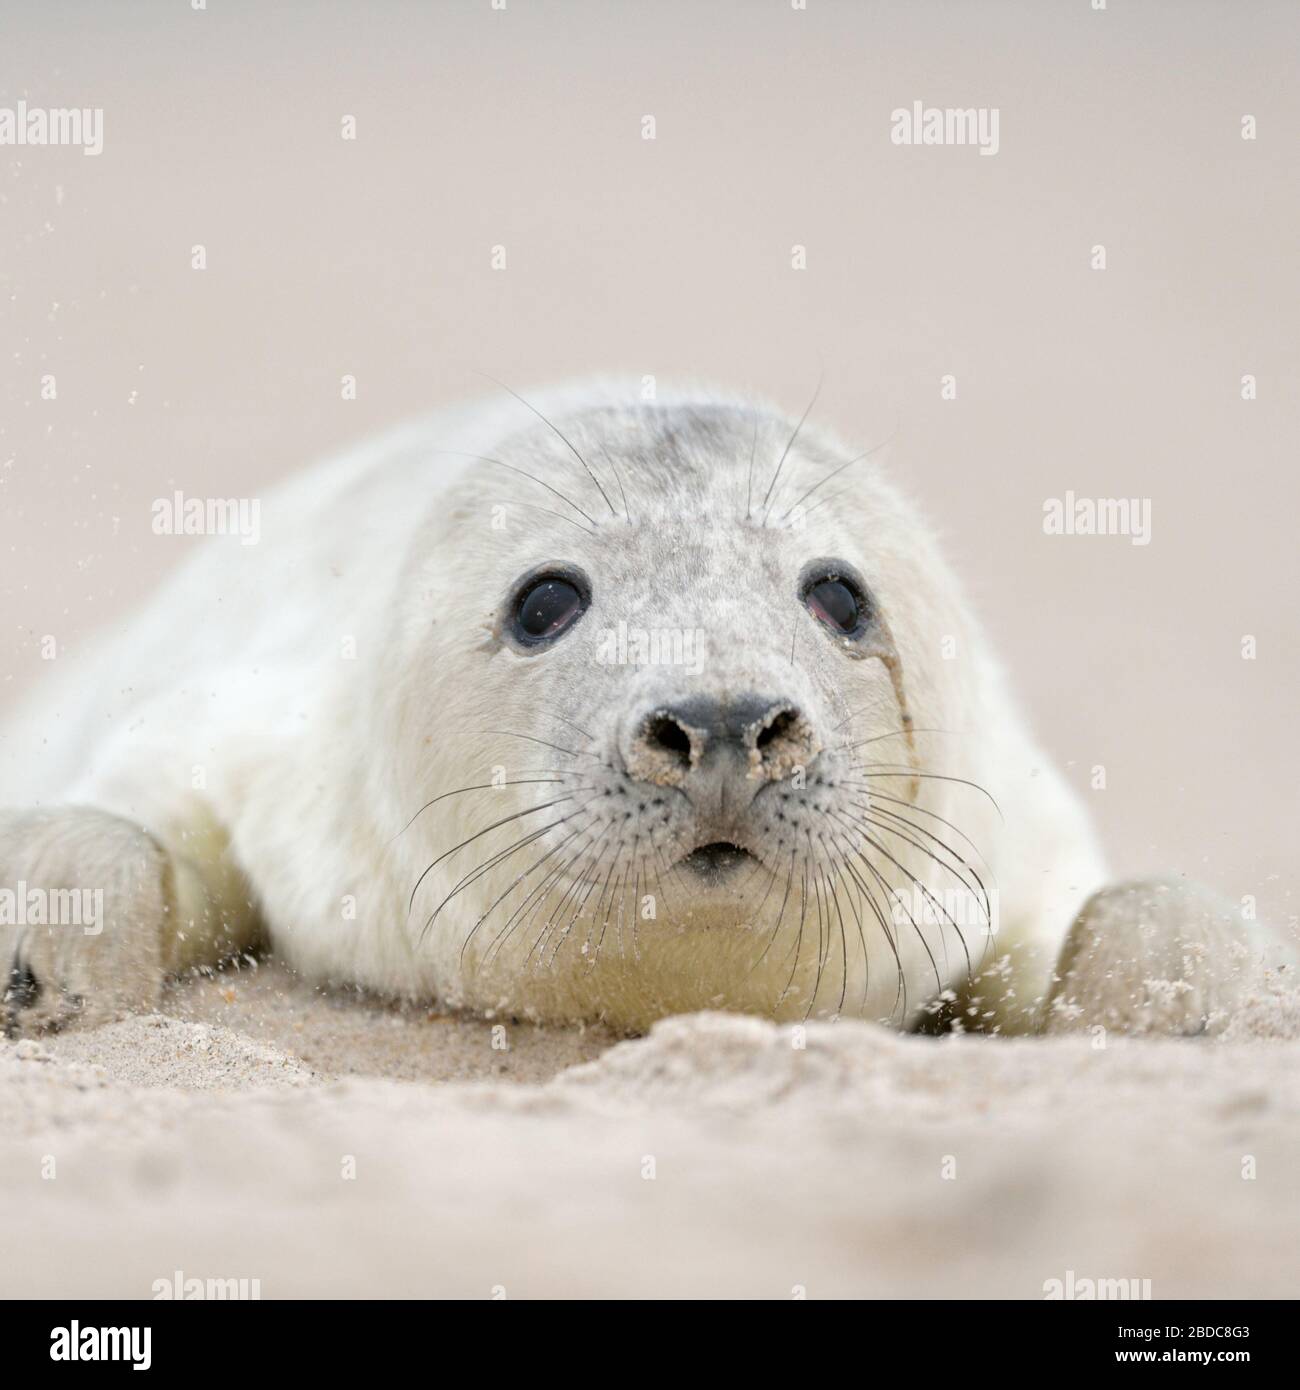 Grey Seal ( Halichoerus grypus ), young pup, fluffy white fur, coat, crawling over the beach, searching for its mum, looks cute, wildlife, Europe. Stock Photo